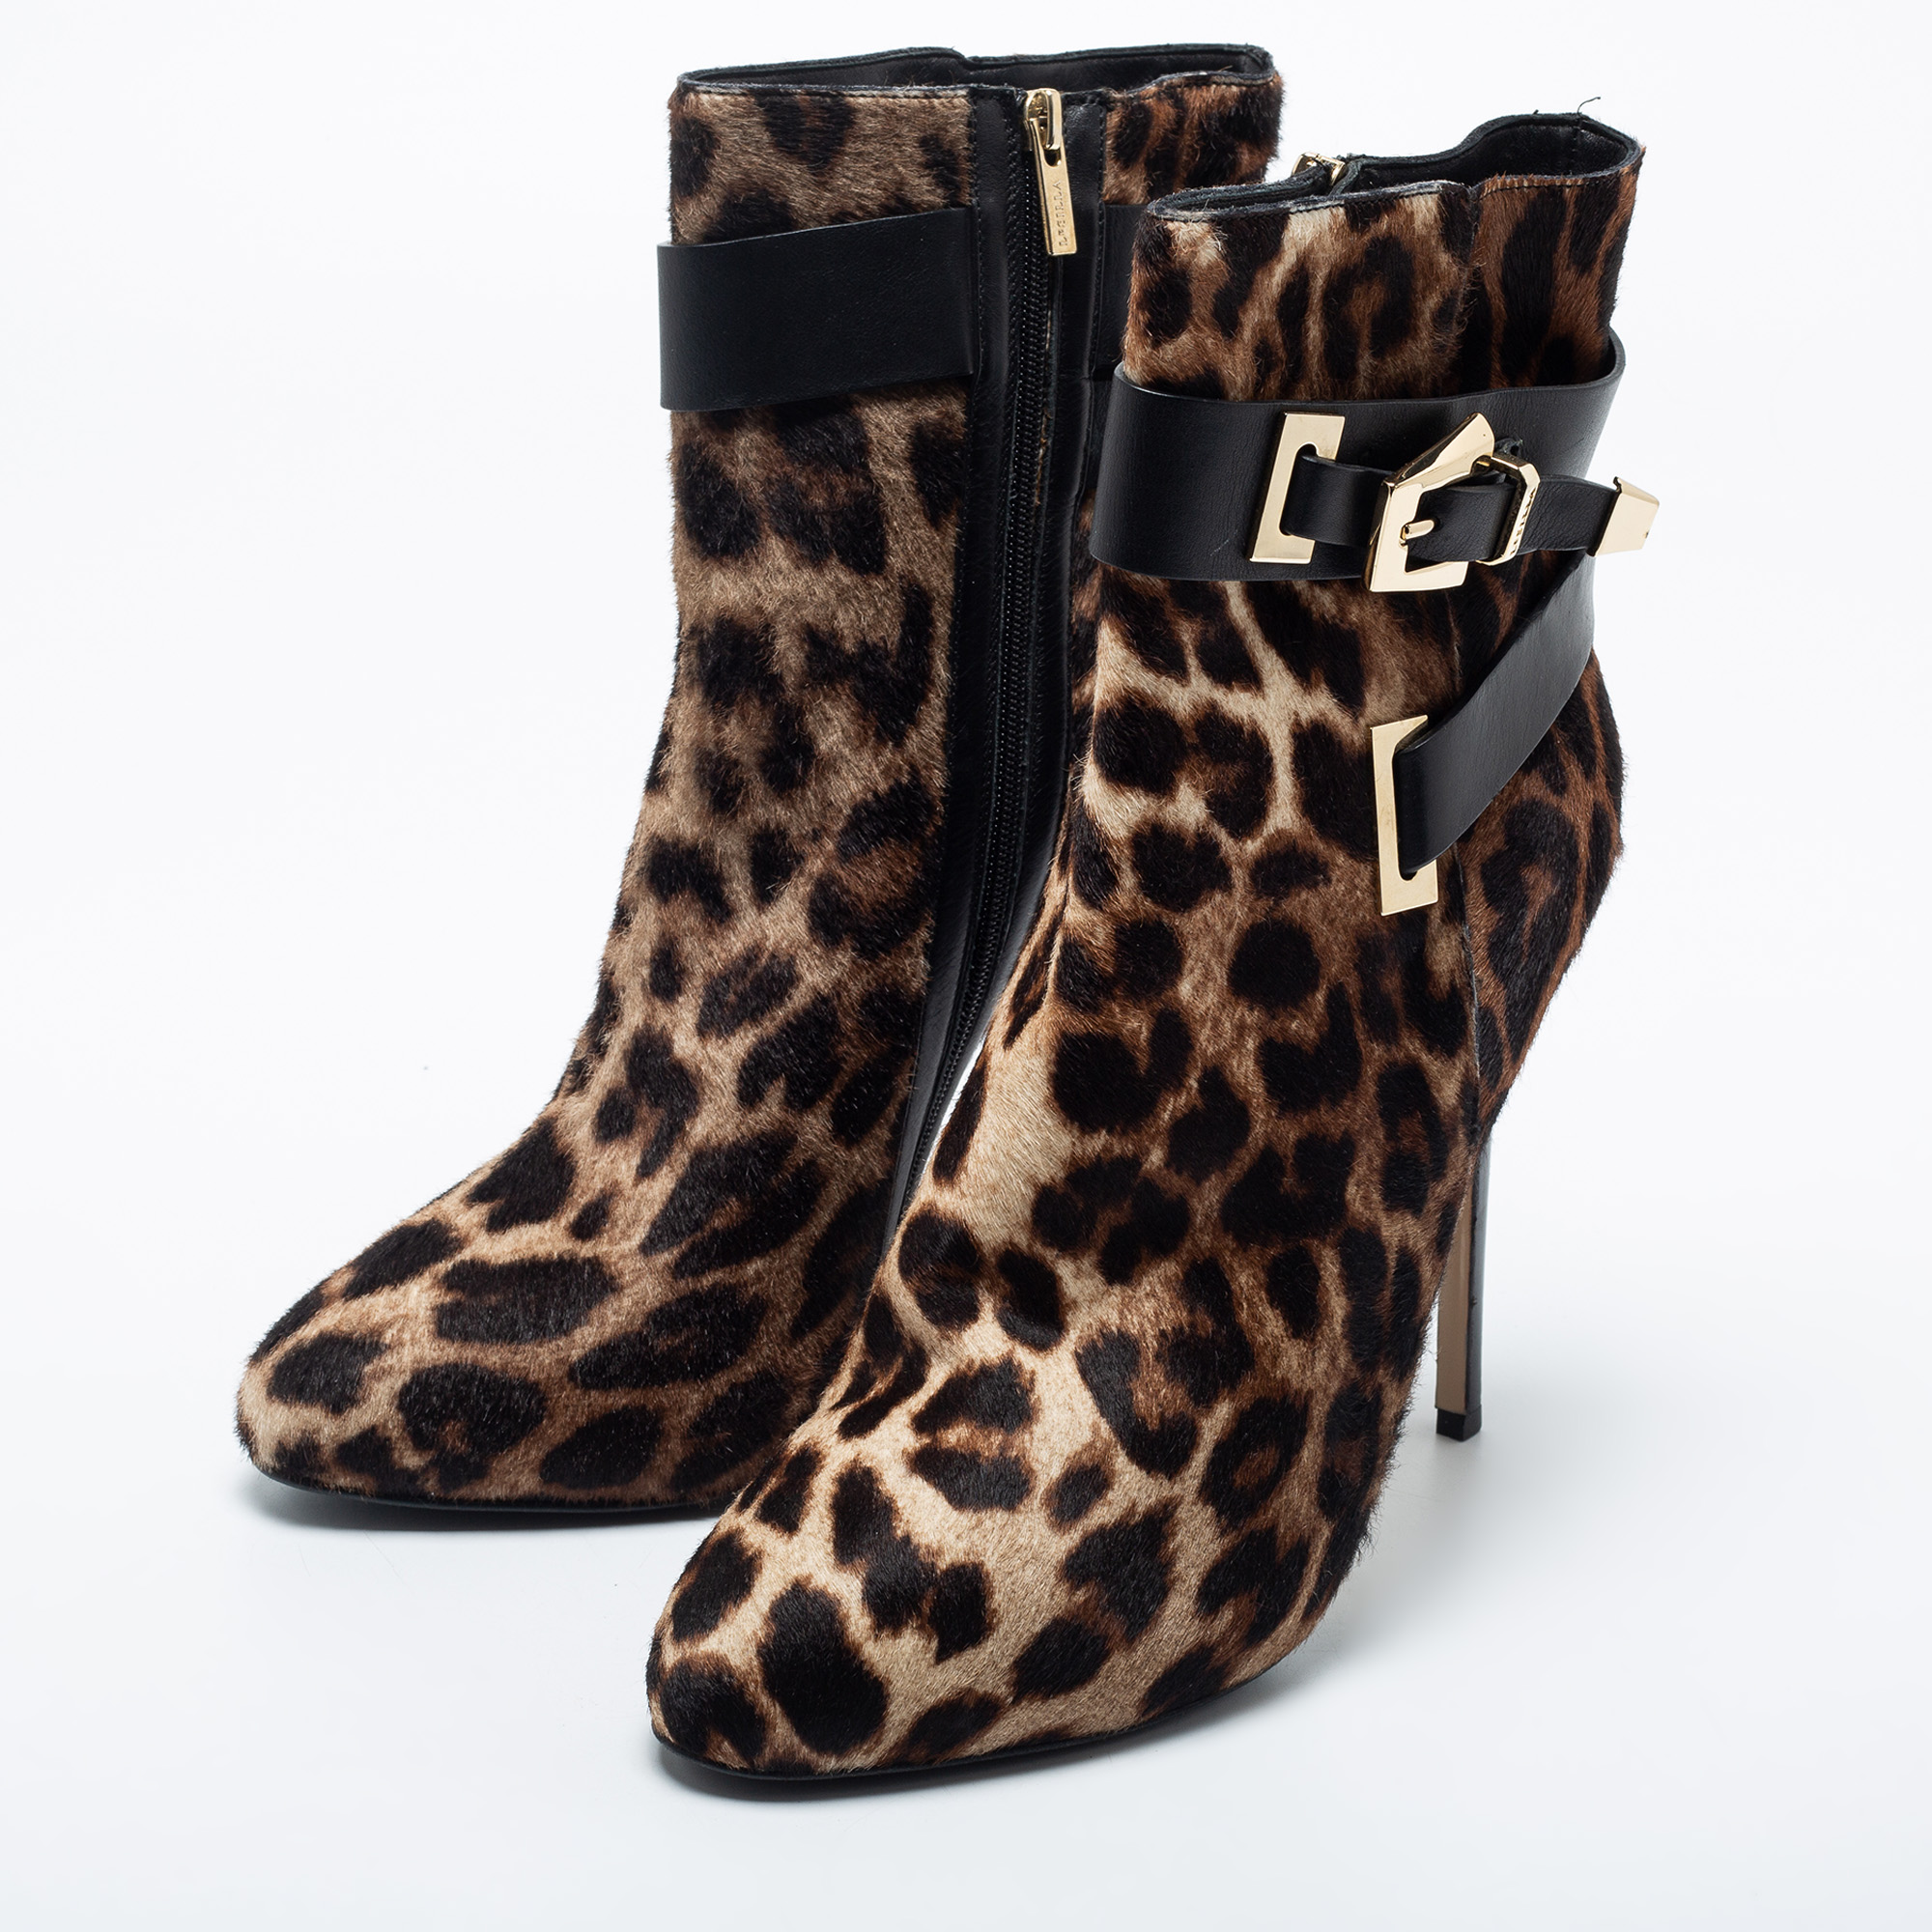 

Le Silla Brown Leopard Printed Calf Hair Ankle Boots Size